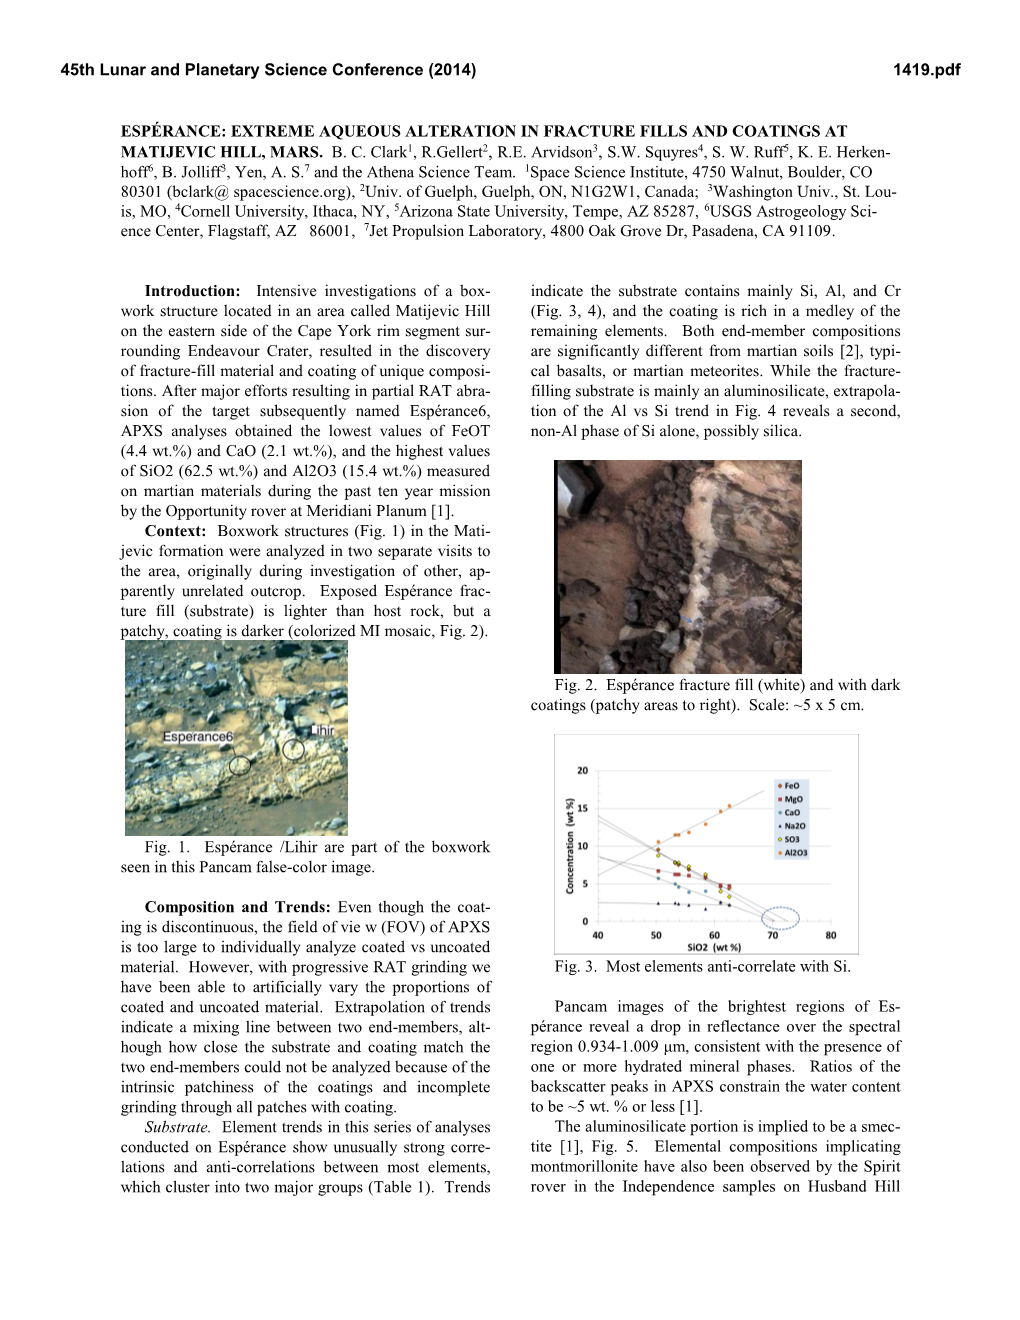 Extreme Aqueous Alteration in Fracture Fills and Coatings at Matijevic Hill, Mars